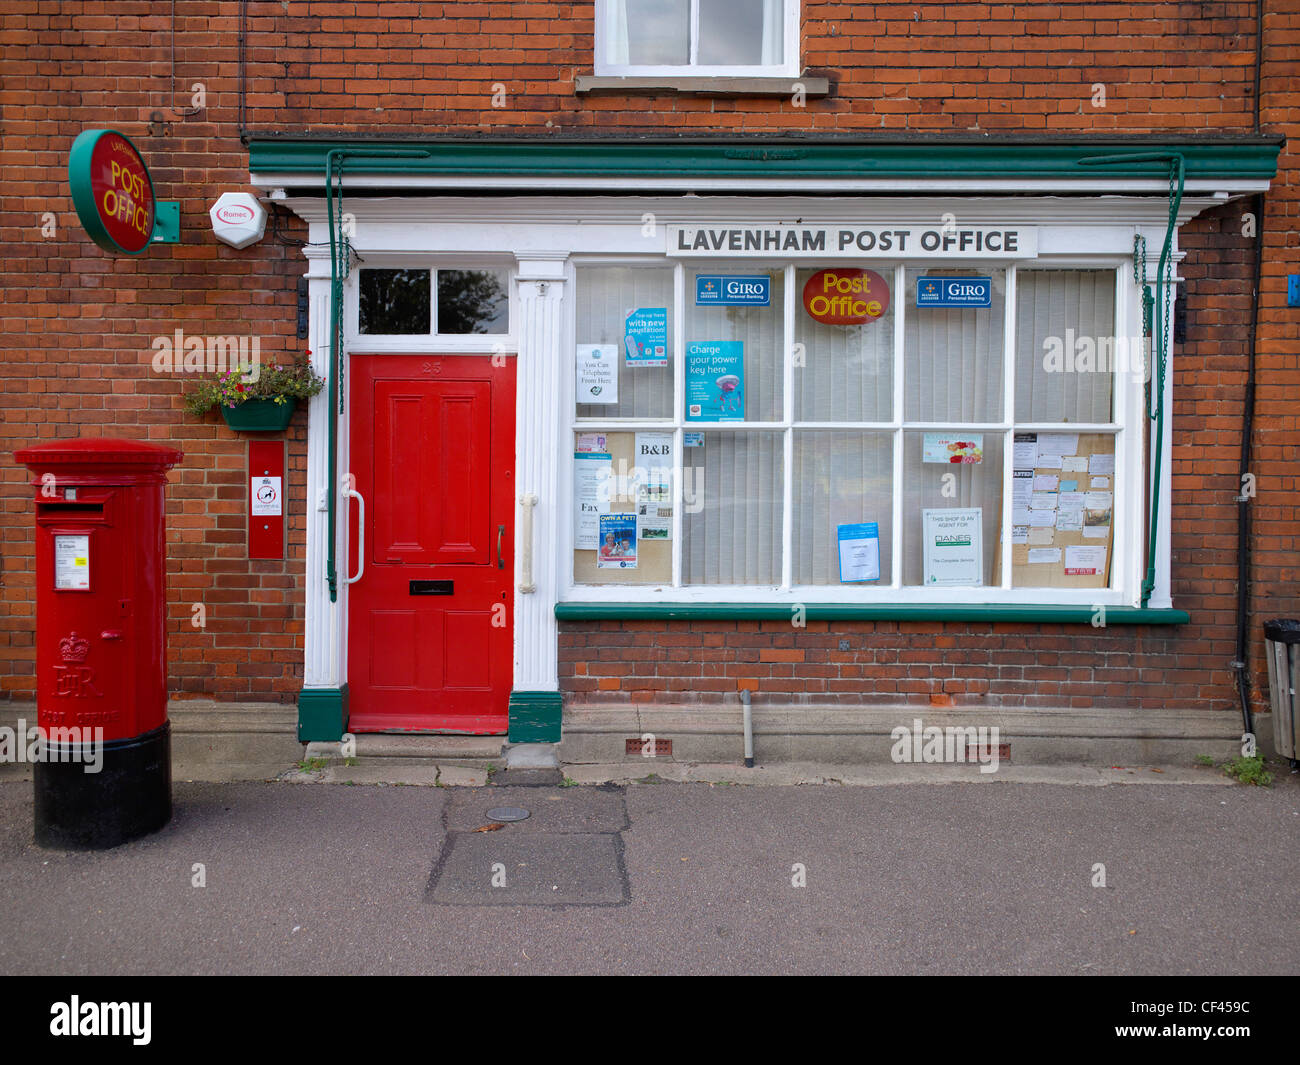 Lavenham Post Office. This famous Suffolk village, popular with ...